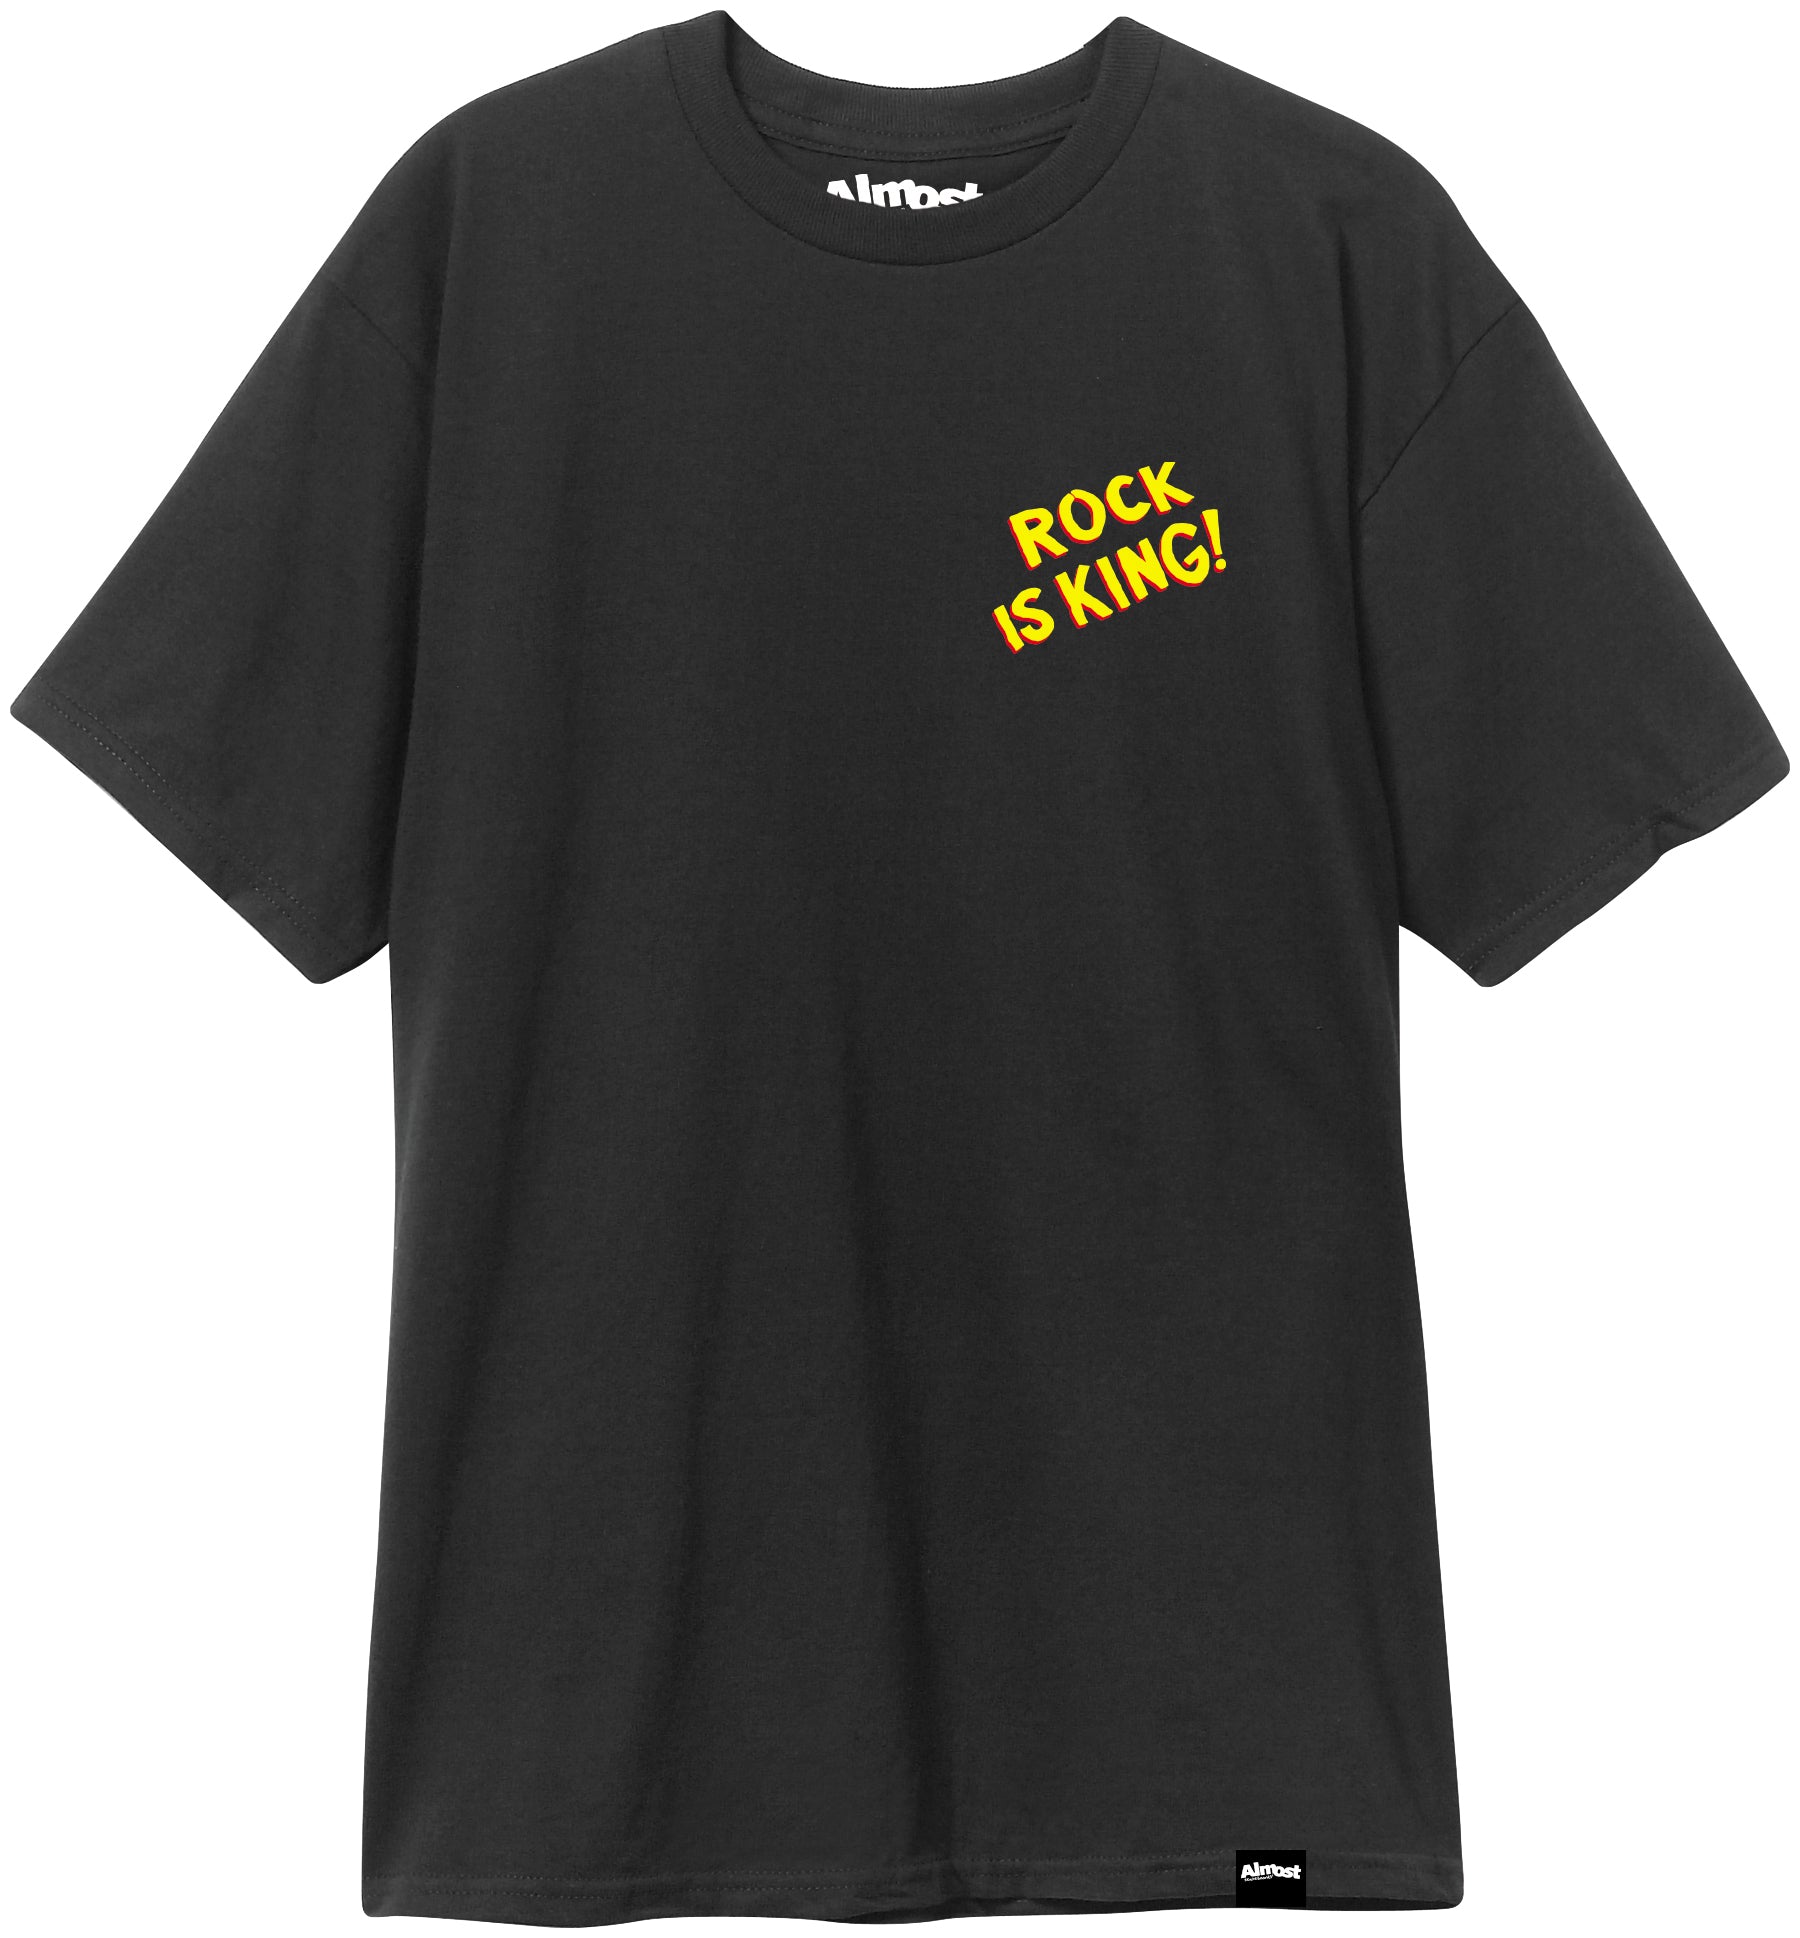 Almost Rock is King T-Shirt - Invisible Board Shop